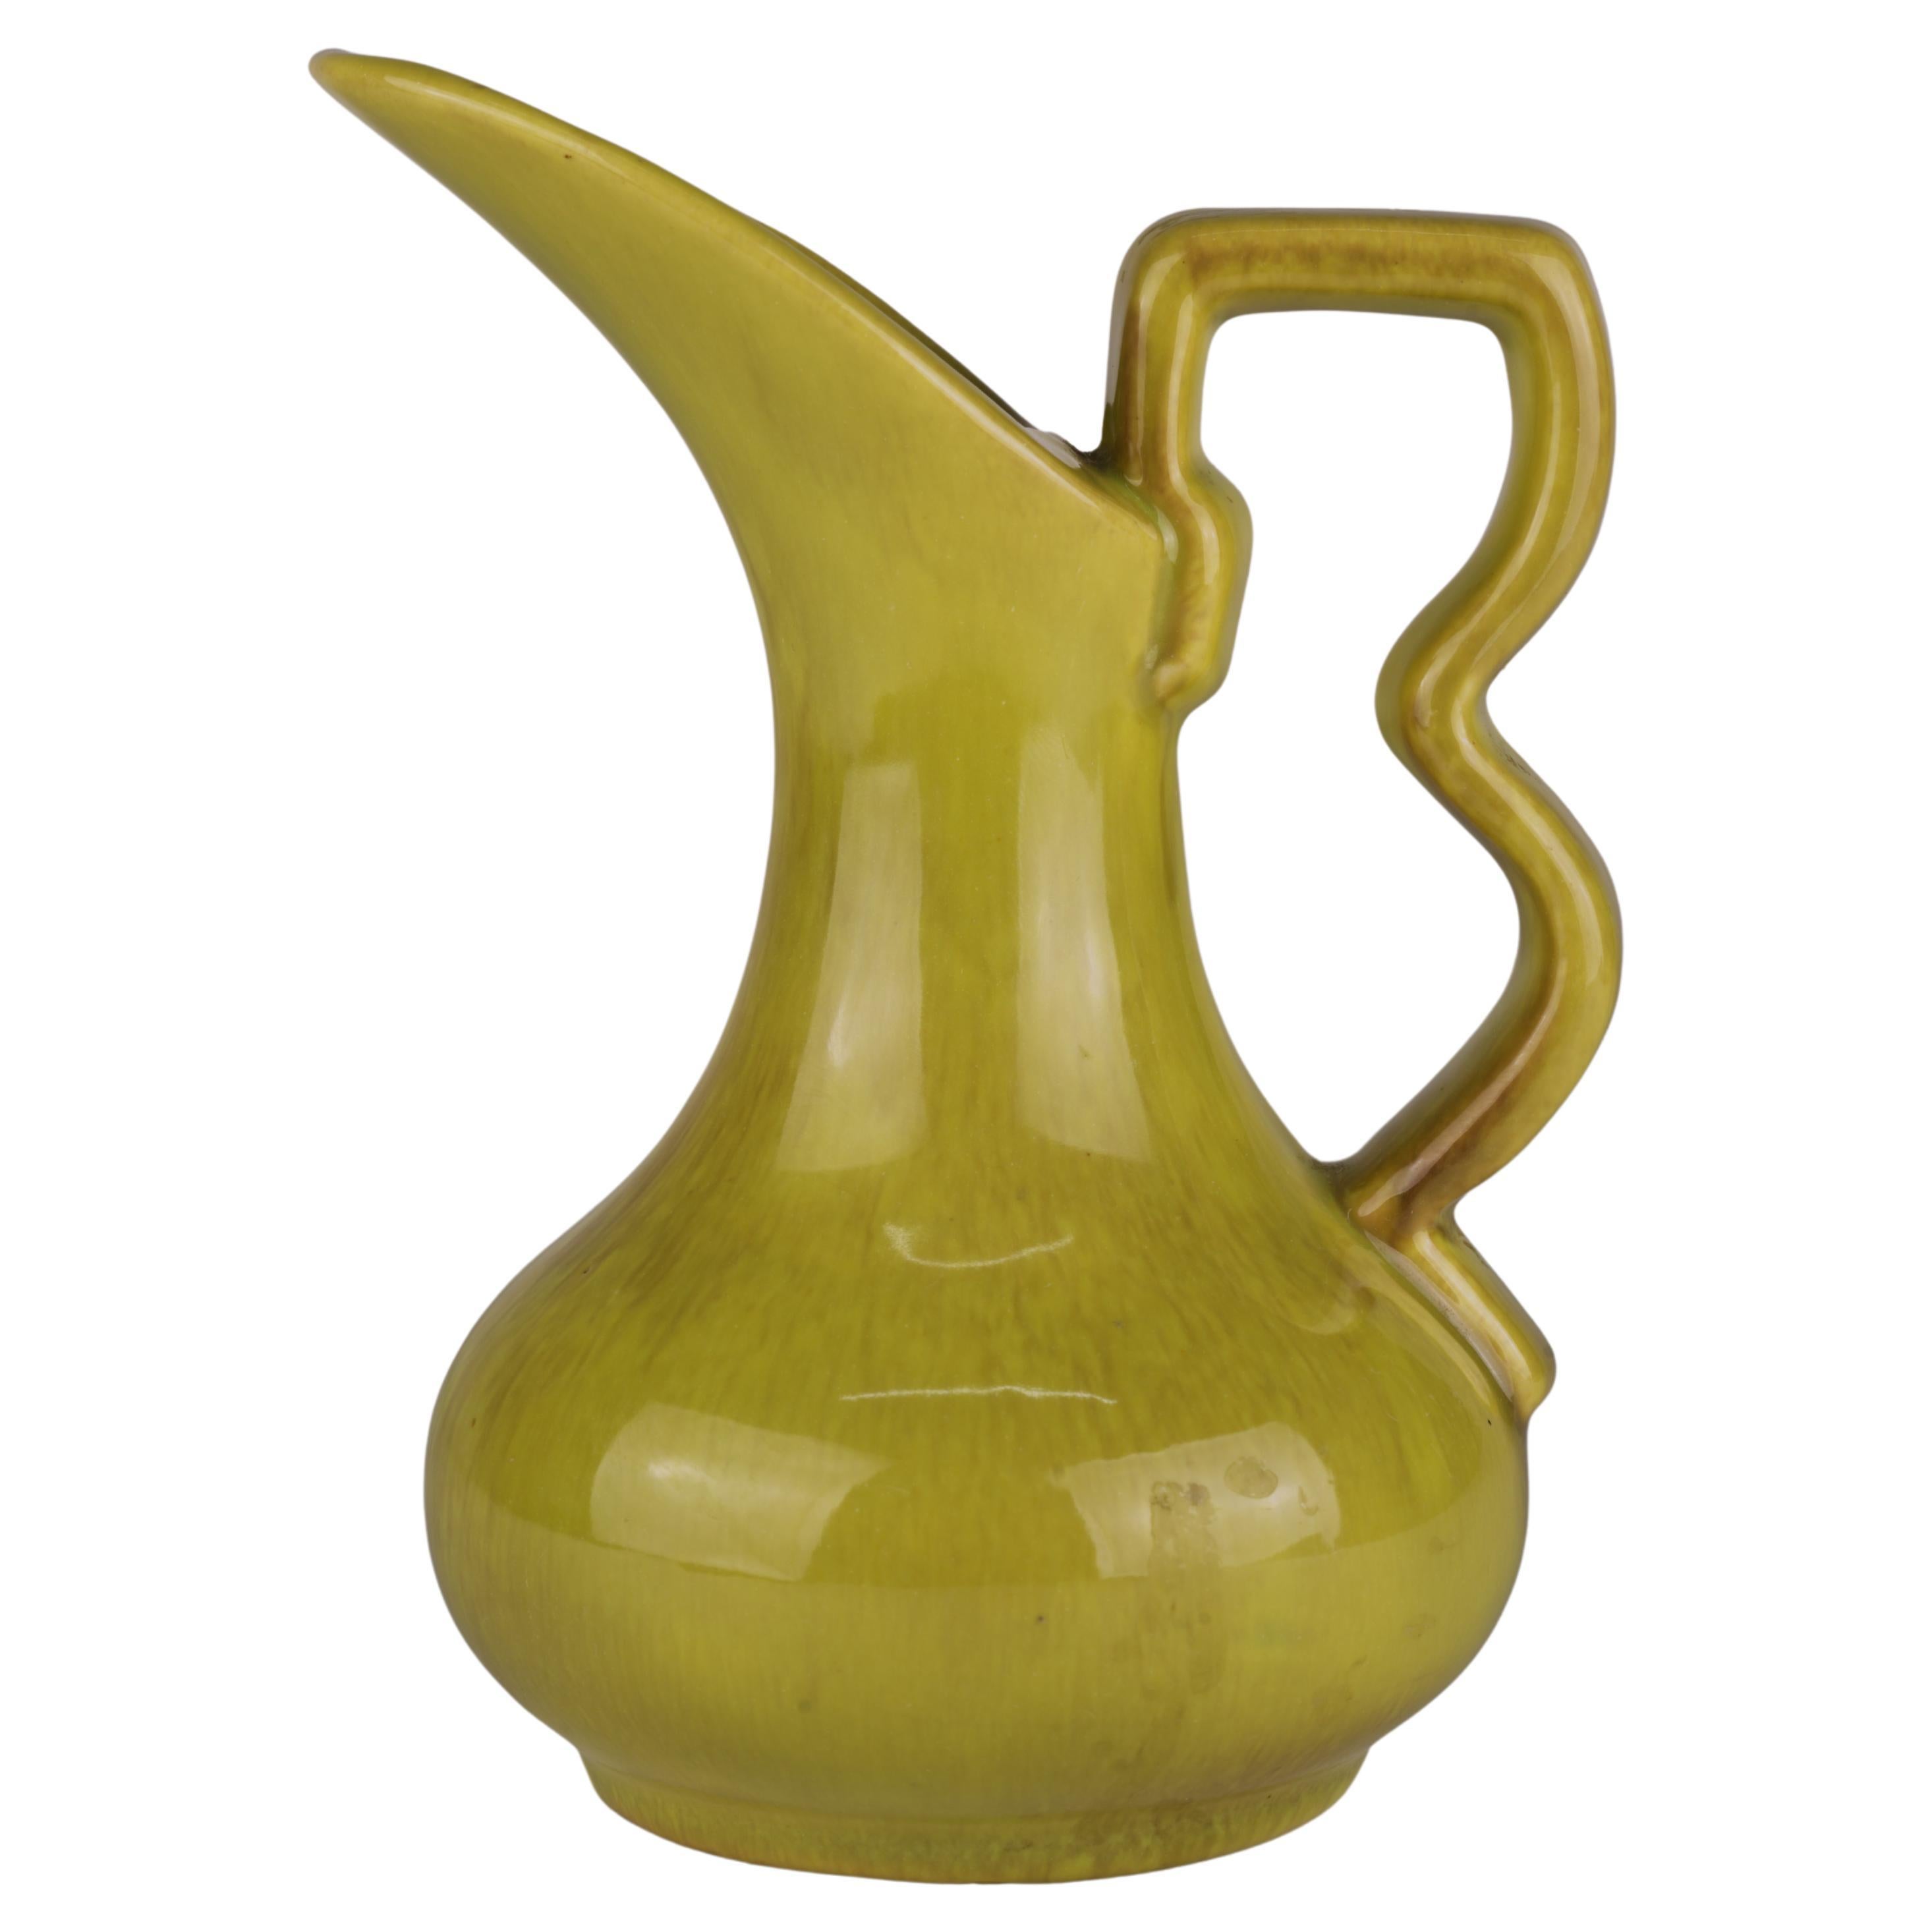 Gonder Pottery Bud Vase Ewer in Chartreuse Drip Glaze 1940s-1950s